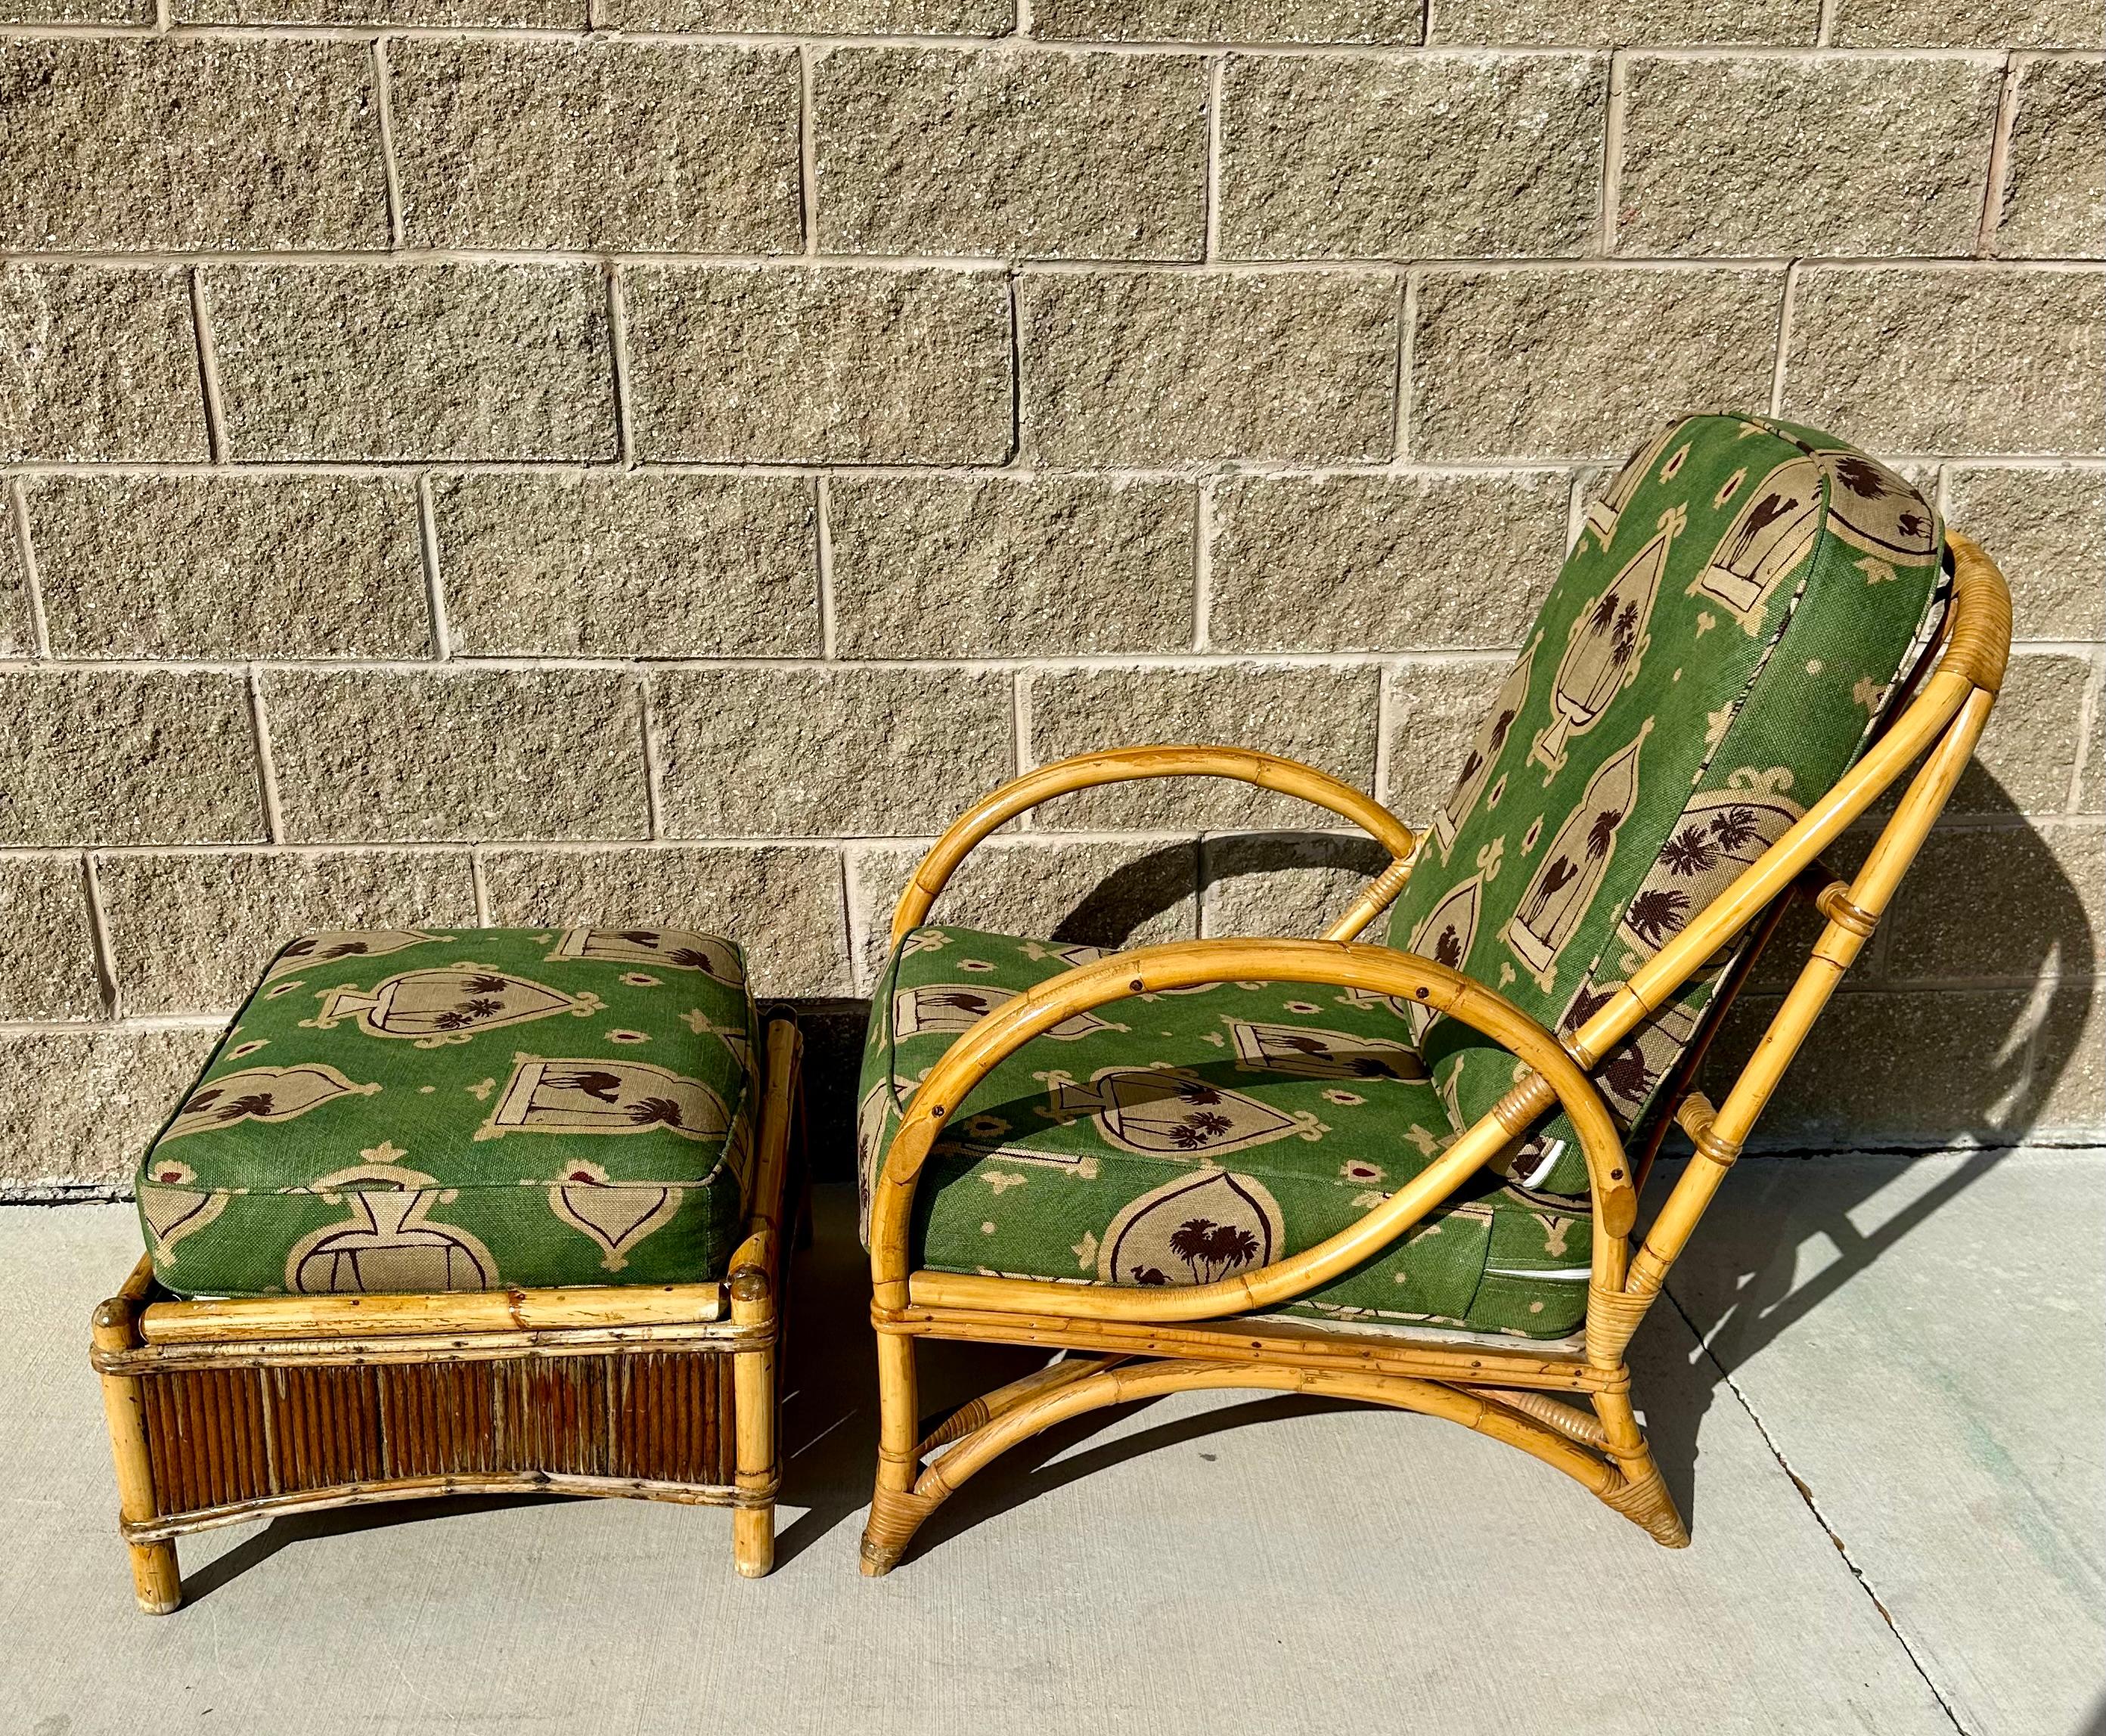 Vintage rare 1940s rattan lounge chair and ottoman. Beautifully reupholstered great quality piece in good vintage condition with some age wear to the rattan. This sofa would compliment any Regency, Mid Century Modern, or eclectic home.
 